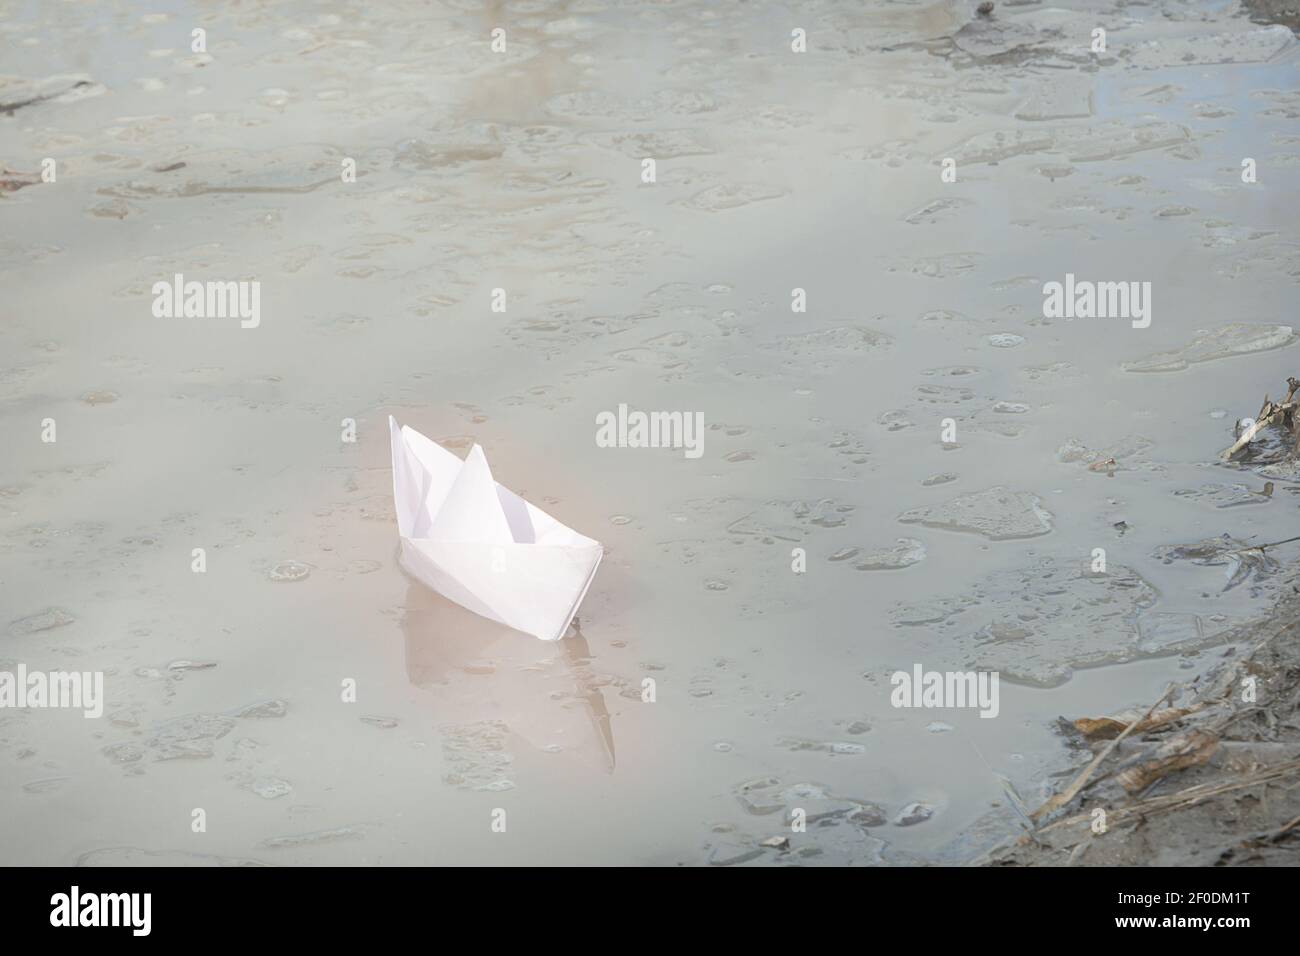 White handmade paper boat is sailing to shore. Dirty water with ice floes. Early spring concept, freedom. Stock Photo